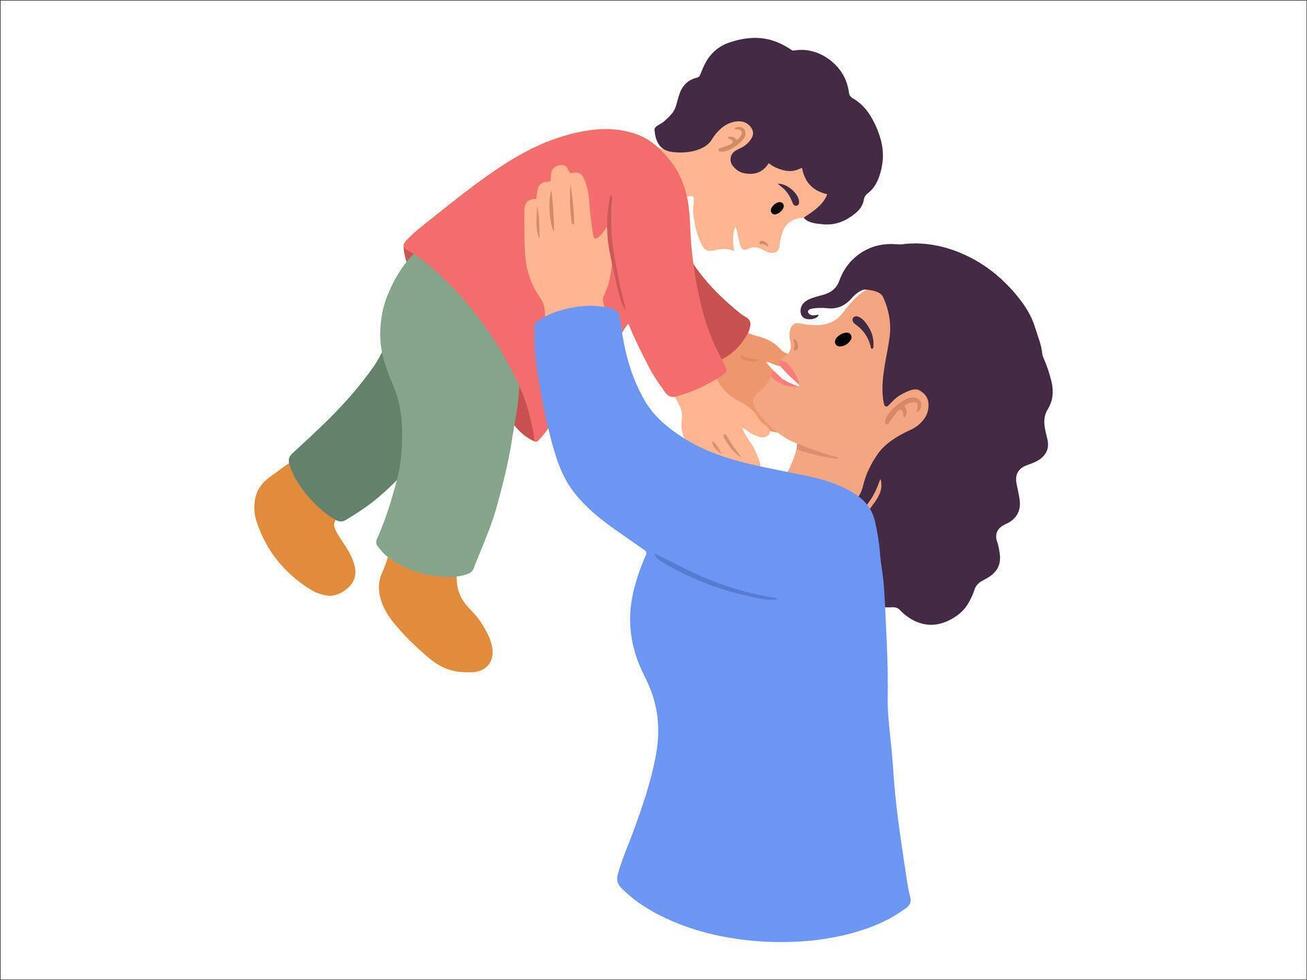 Mother holding kid or avatar icon illustration vector